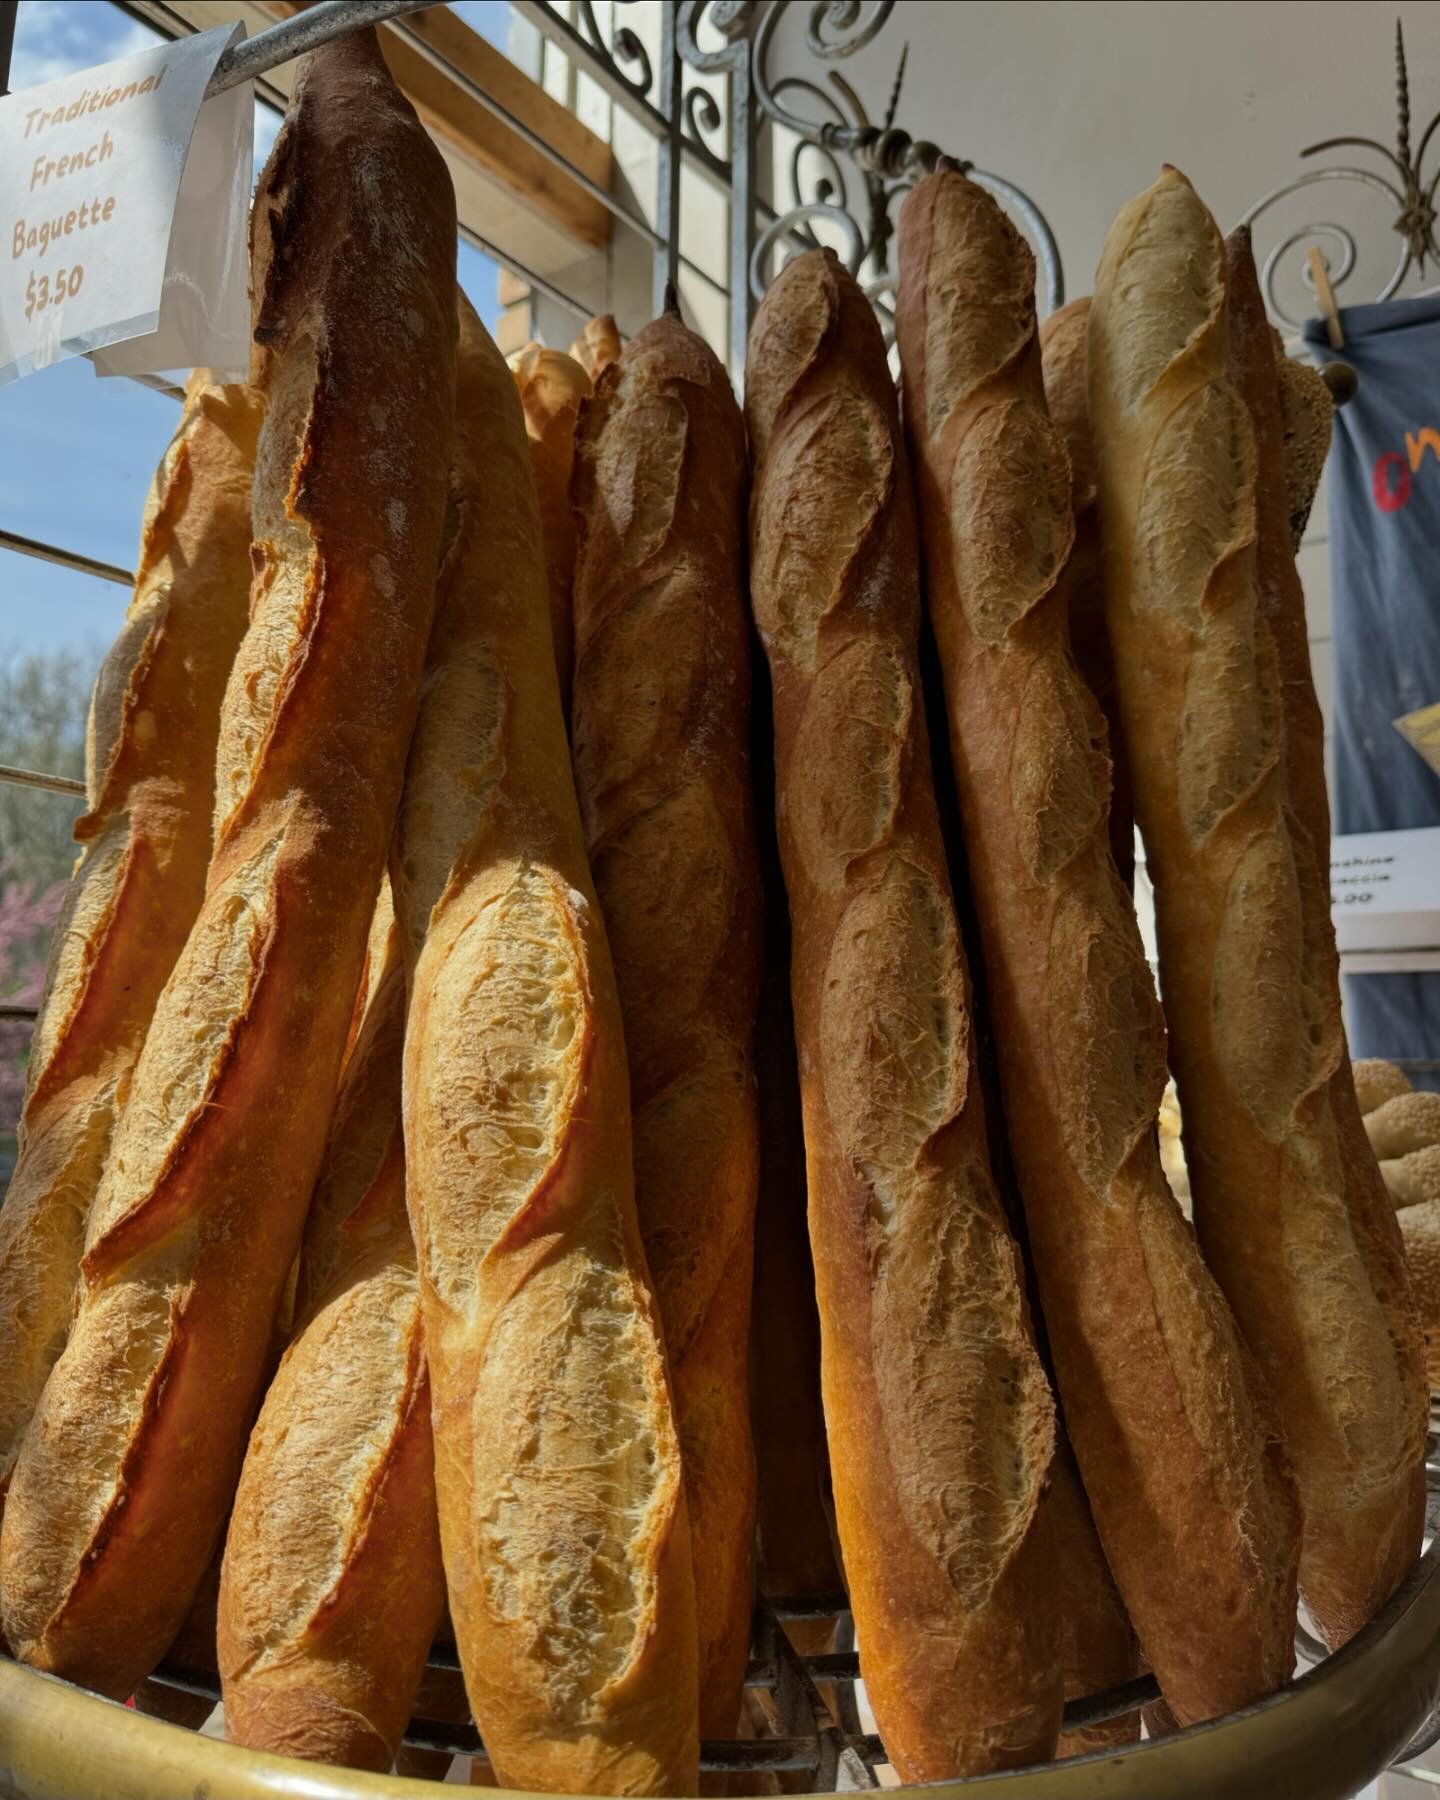 Tomorrow is Arbor Day and in honor of Earth Month, we will be donating a dollar from every traditional baguette sale on Friday April 26th bought at either location, to the Arbor Day Foundation! 

Every dollar plants a tree! Join us in donating and pl